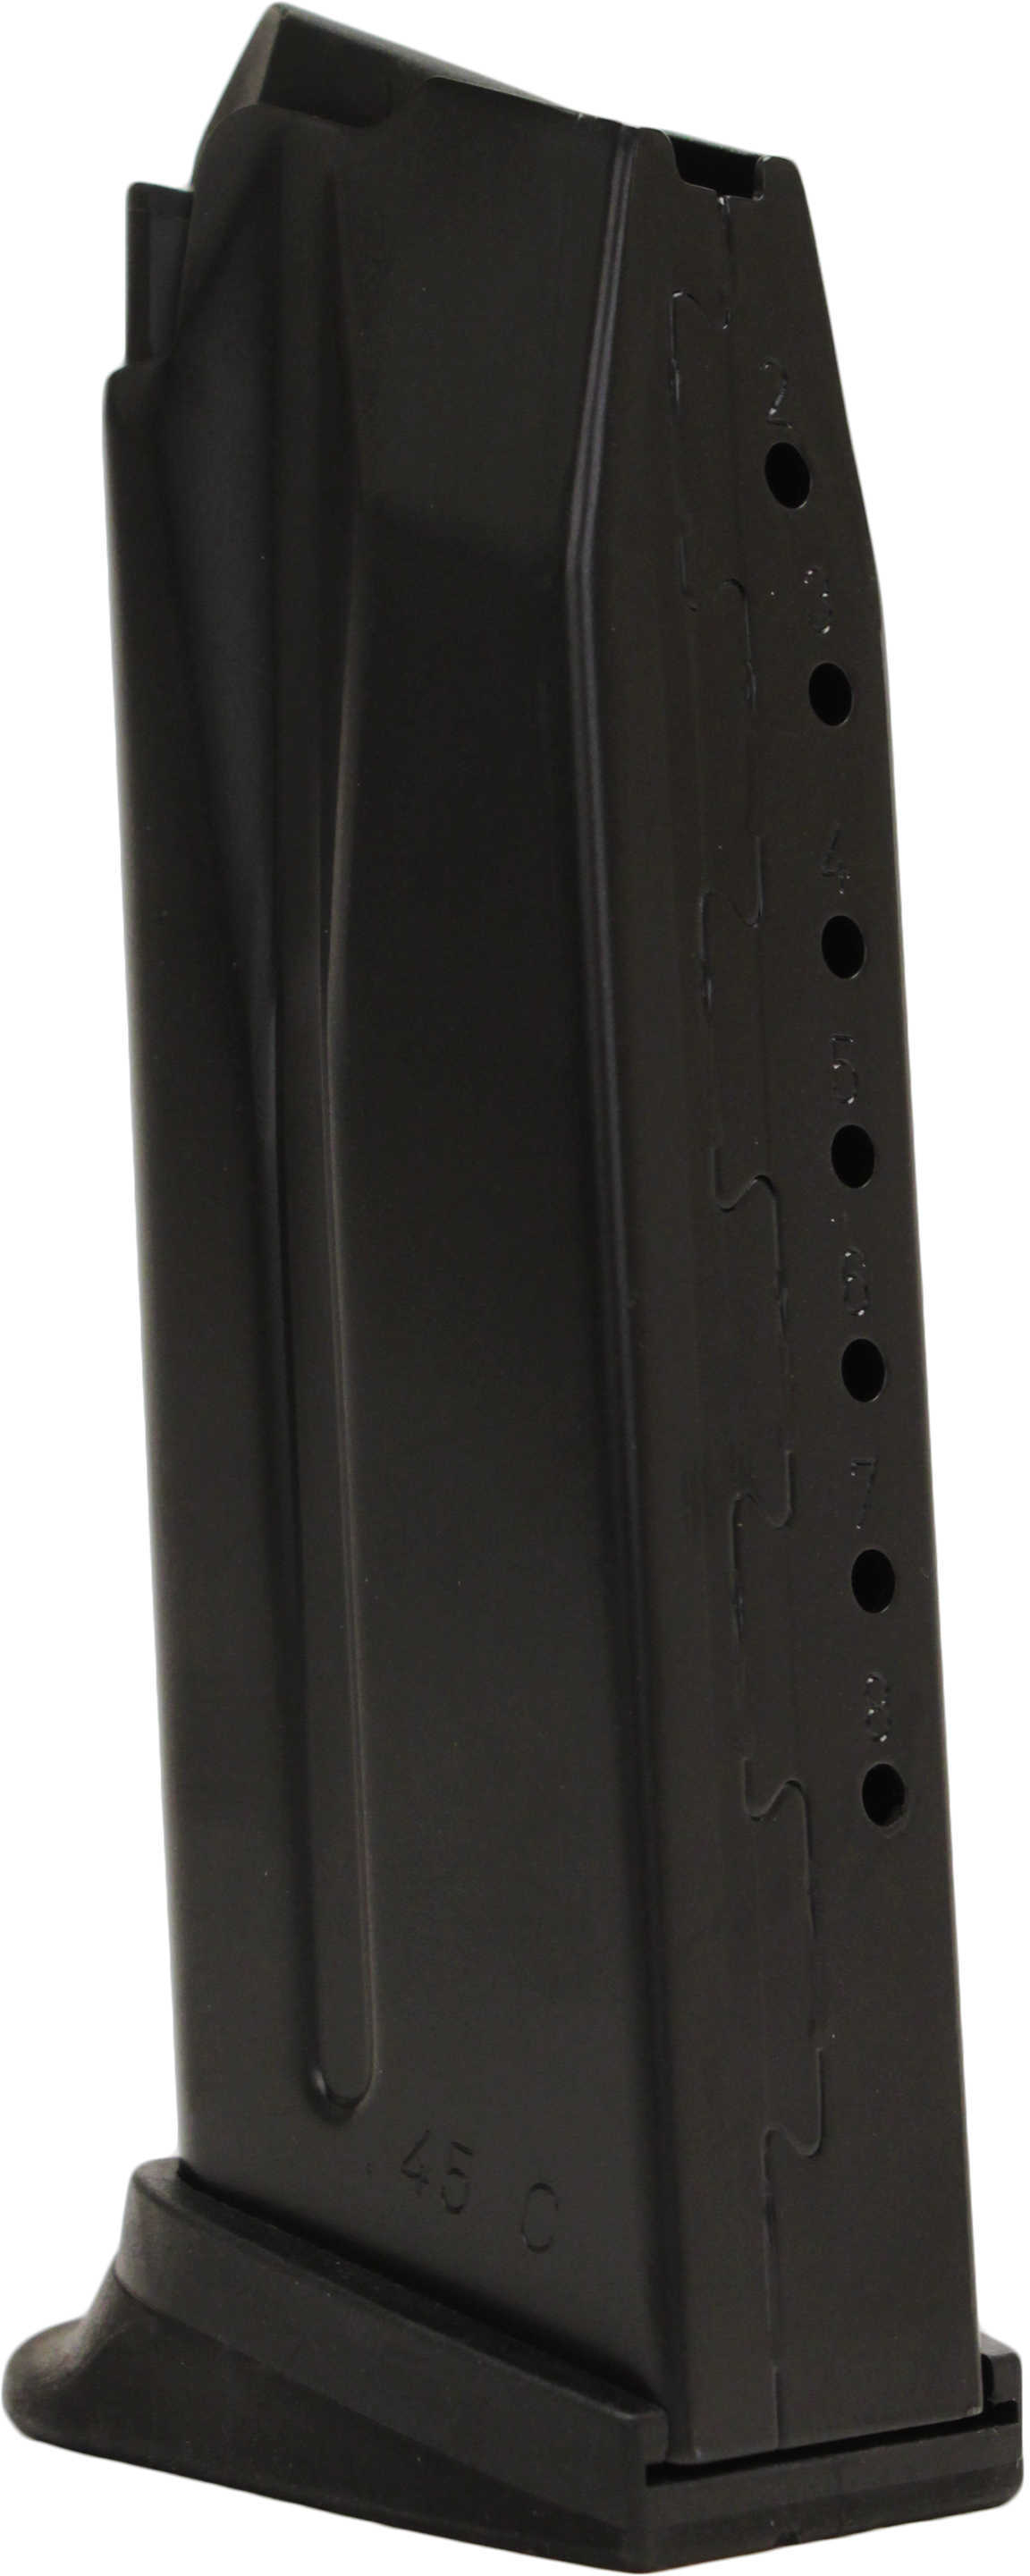 Heckler & Koch USP45/HK45 Compact 8 Round Magazine ECt FP Md: 234269S-img-1